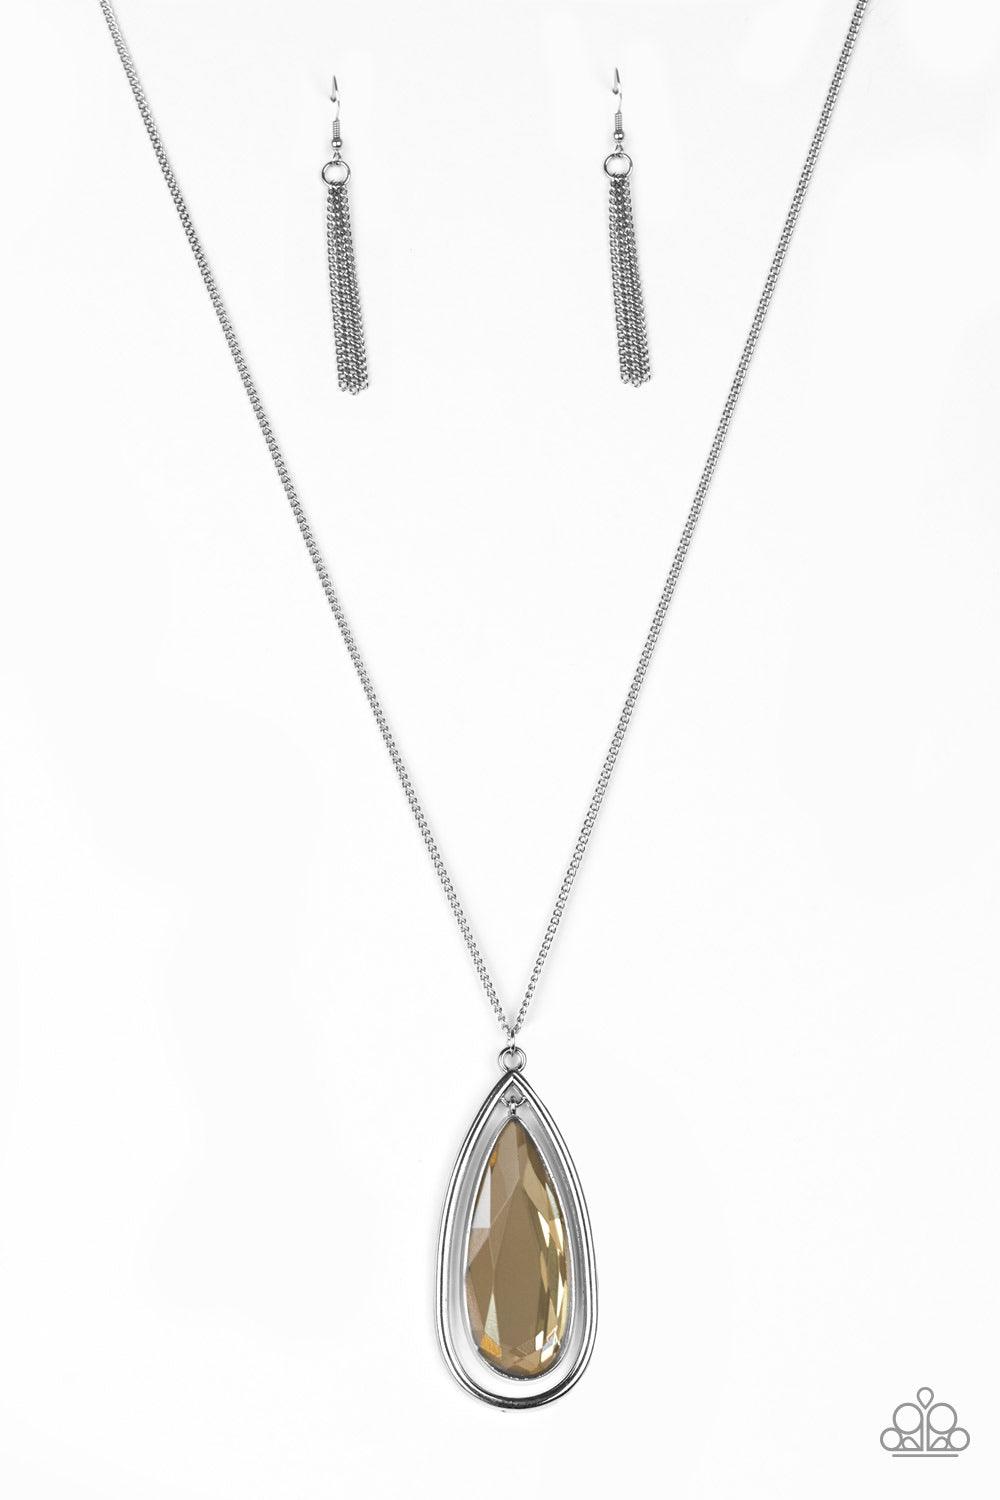 Paparazzi Accessories The Royal Coronation - Brown An oversized golden teardrop gem swings from the top of a glistening silver teardrop frame. The dramatic pendant swings from the bottom of an elegantly elongated silver chain for a regal finish. Features